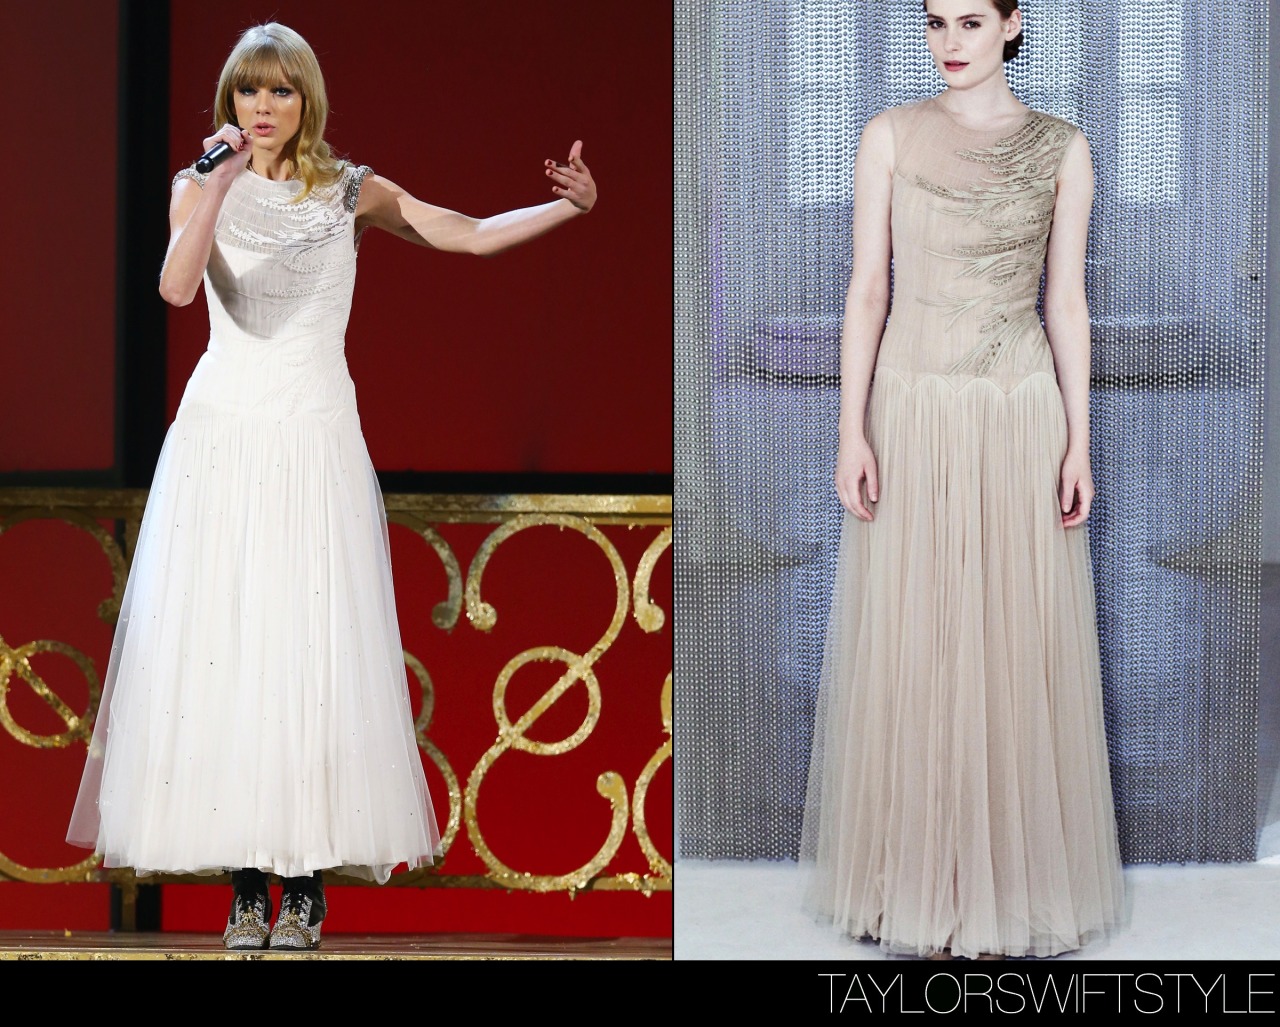 Performing at the American Music Awards | November 18, 2012Catherine Deane Spring 2013 &#8216;Ophira Dress&#8217;Last year Taylor brought the house down at the American Music Awards when she performed &#8220;I Knew You Were Trouble.&#8221; for the first time ever. The performance featured one of Taylor&#8217;s signature on-stage costume changes where she switched from this Catherine Deane Spring 2013 gown to a custom costume. 